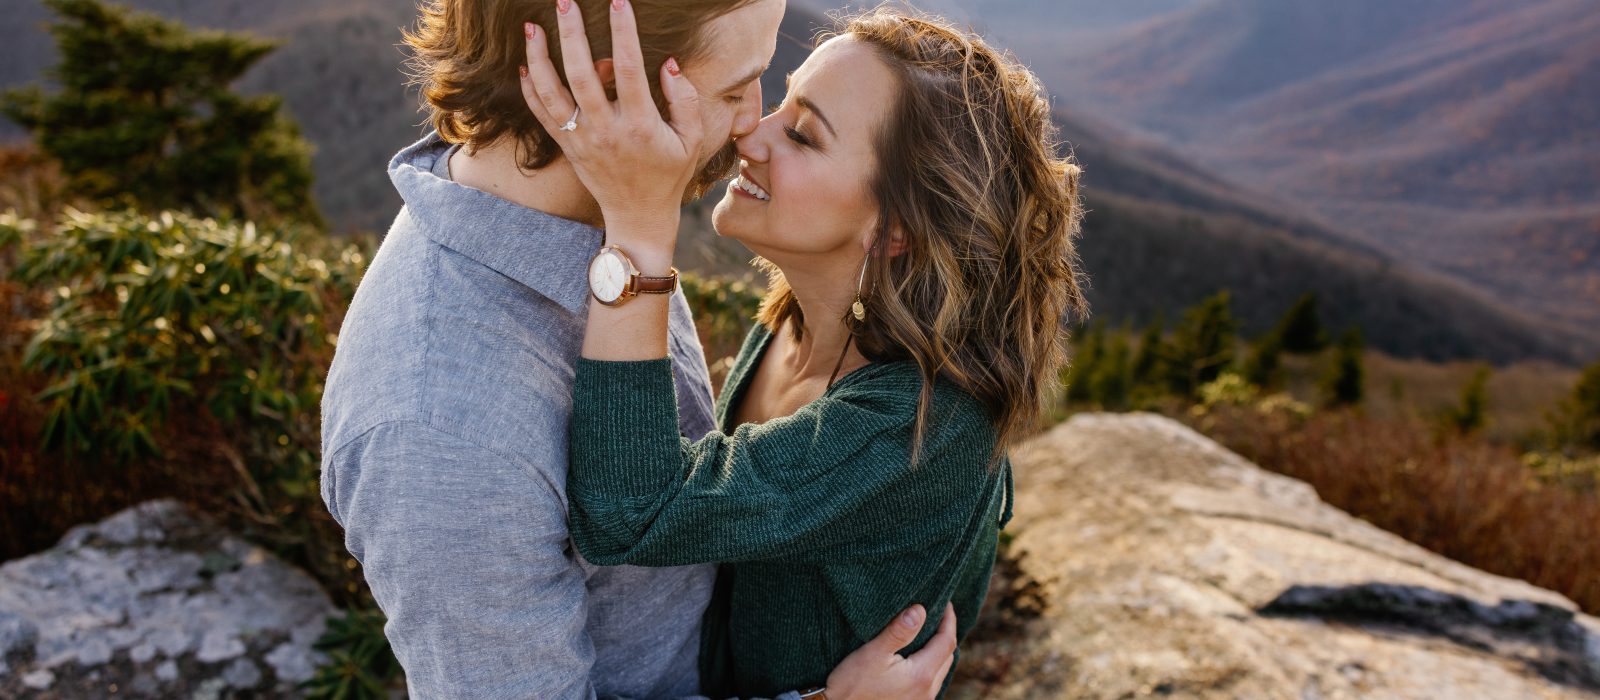 Black Balsam engagement photos in Asheville | Kathy Beaver Photography